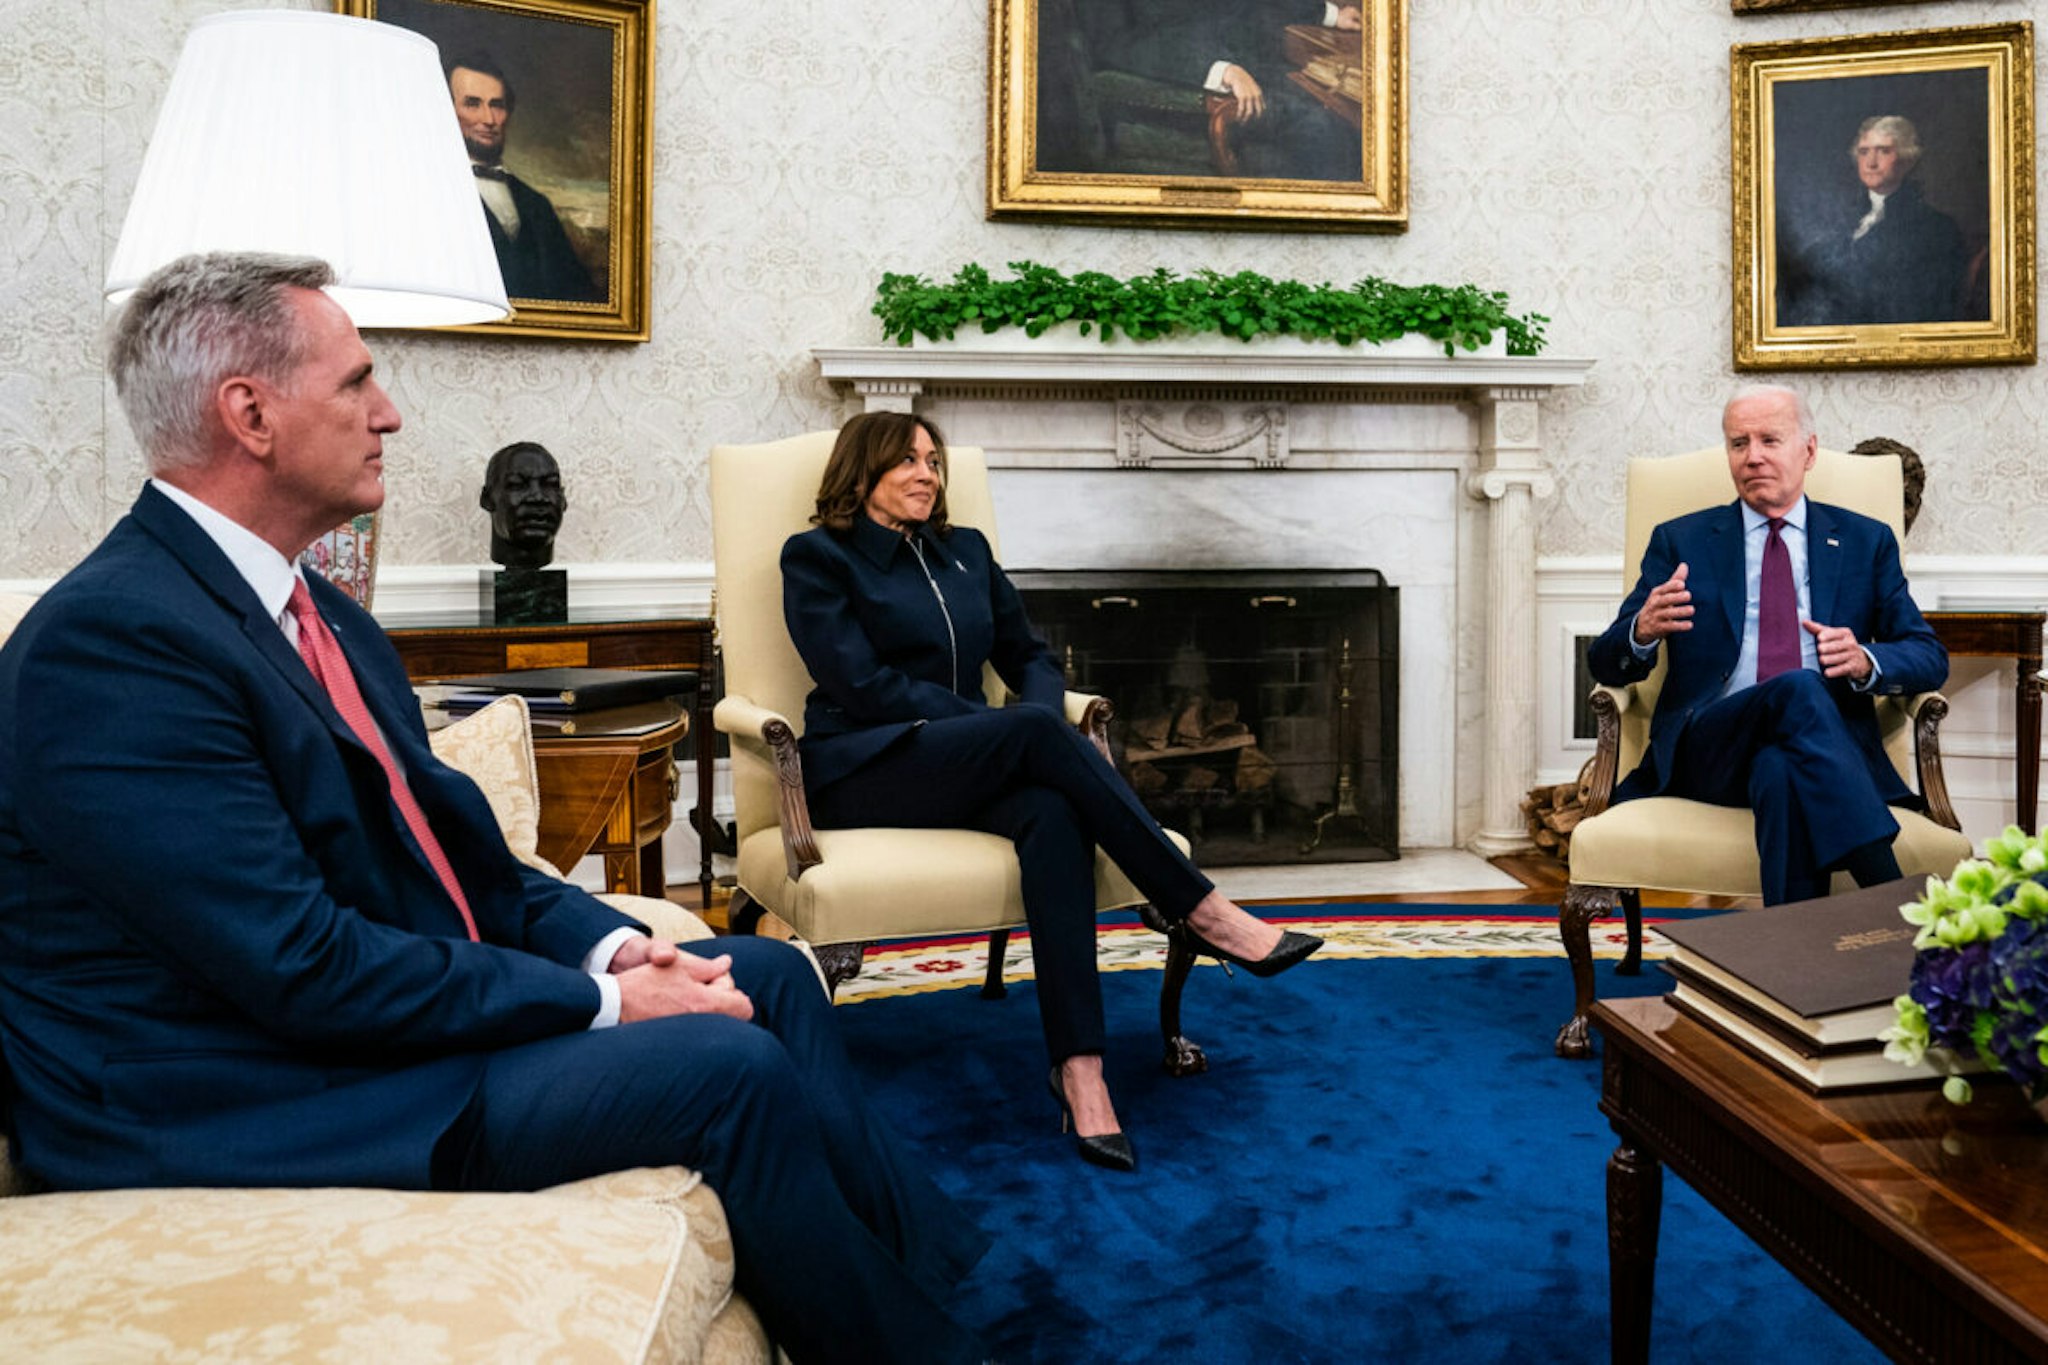 US President Joe Biden and Vice President Kamala Harris meet with House Speaker Kevin McCarthy in the Oval Office of the White House on Tuesday, May 16, 2023.